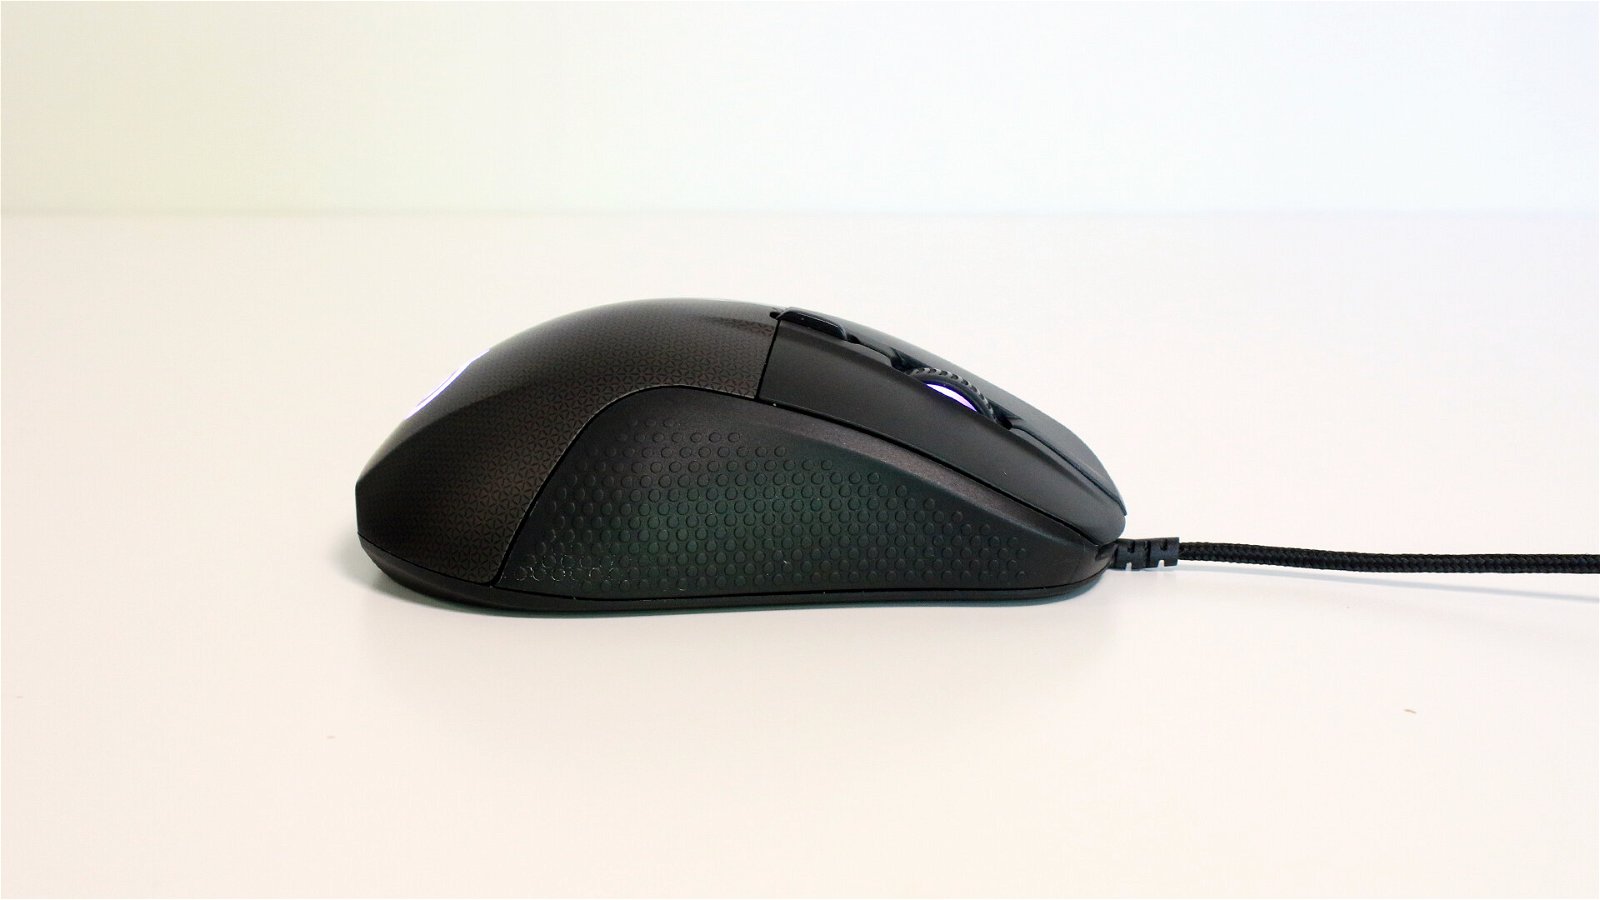 Steelseries Rival 700 Mouse (Hardware) Review 17